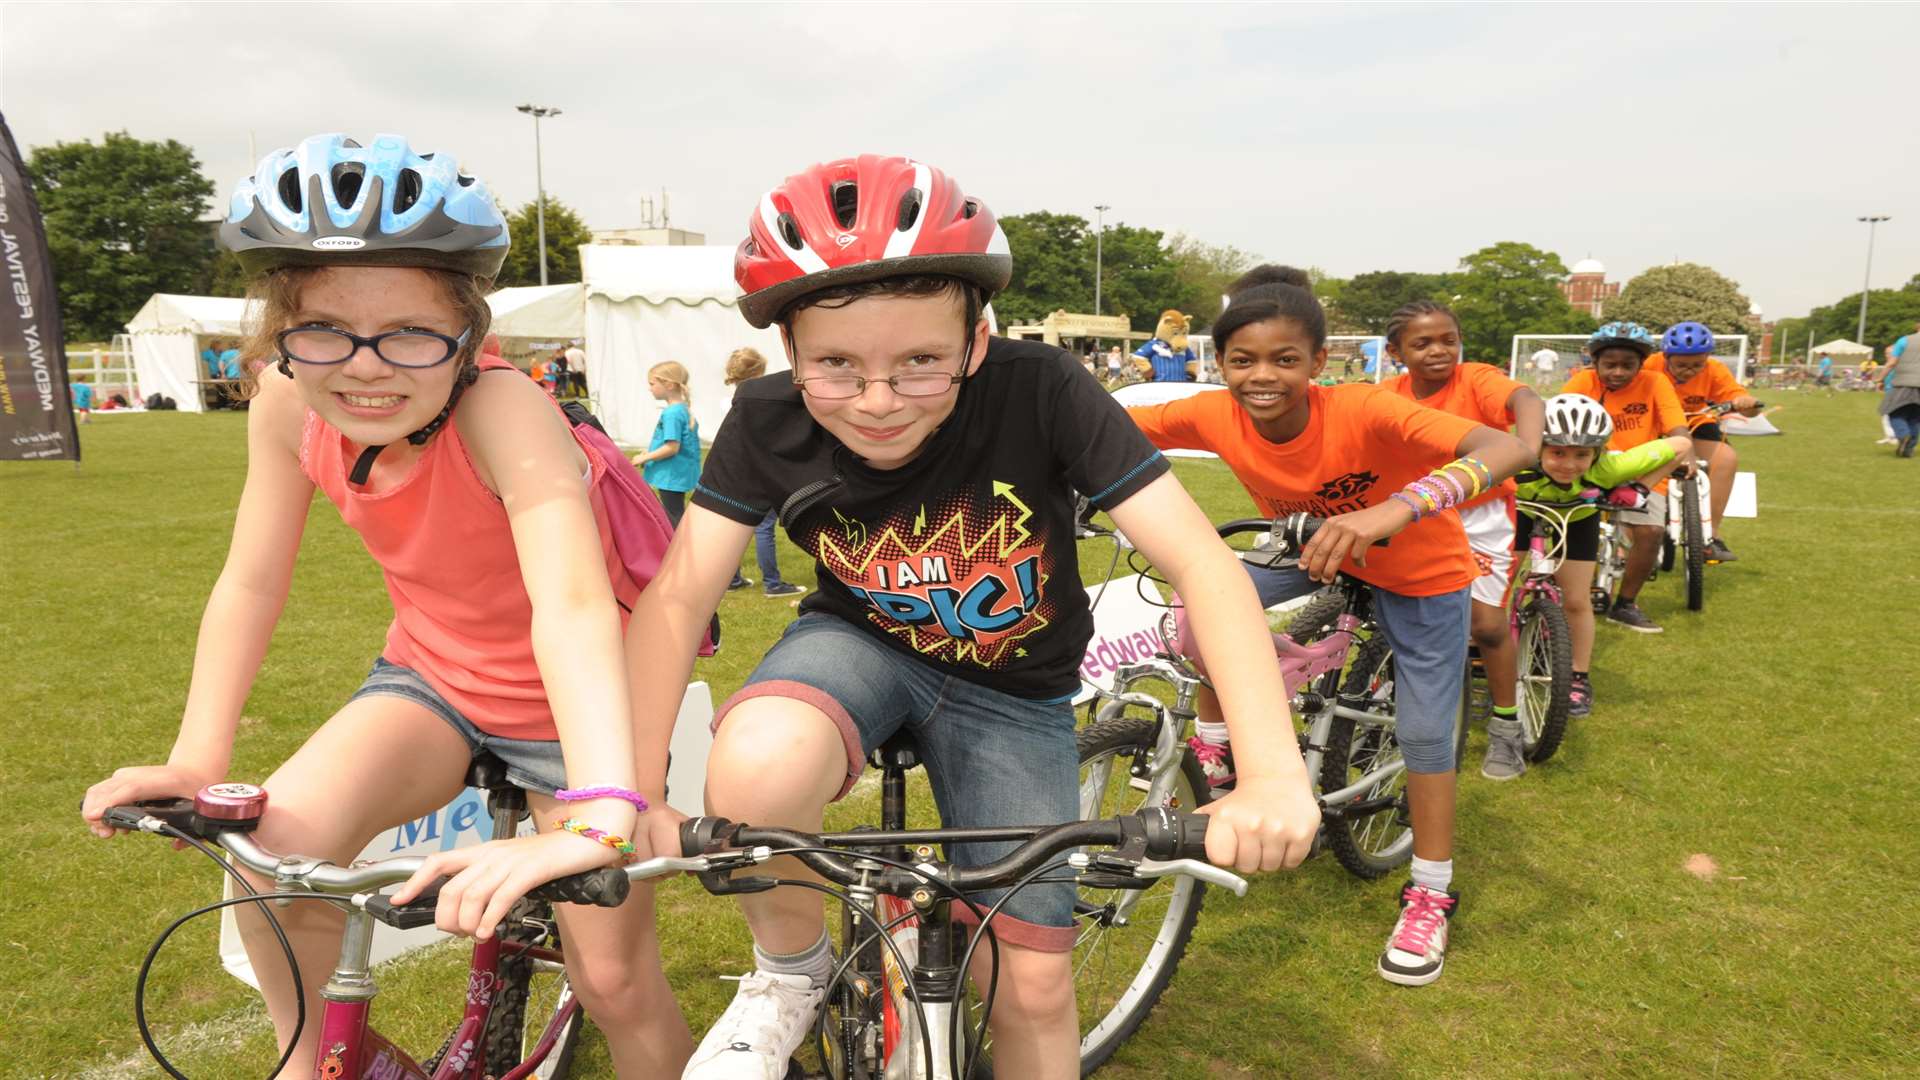 The Medway Big Ride is an annual mass participation event